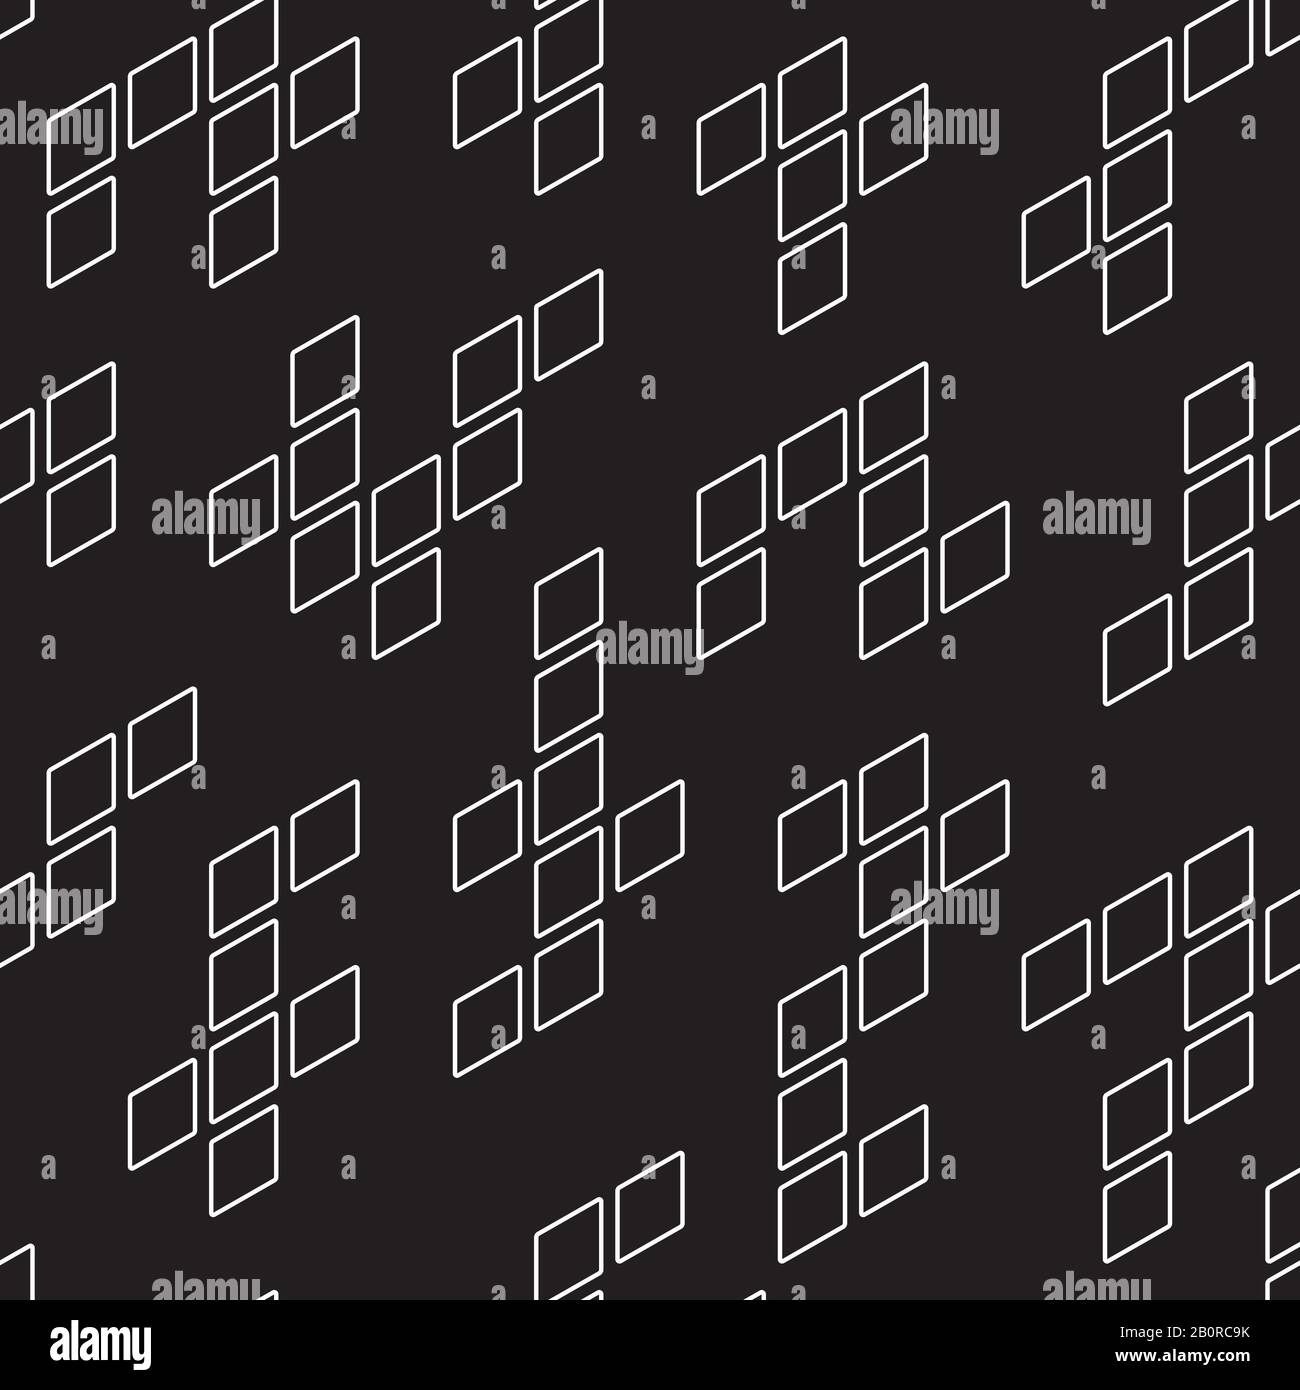 Squares contour random matrix pattern. Black and wite seamless vector background. Stock Vector